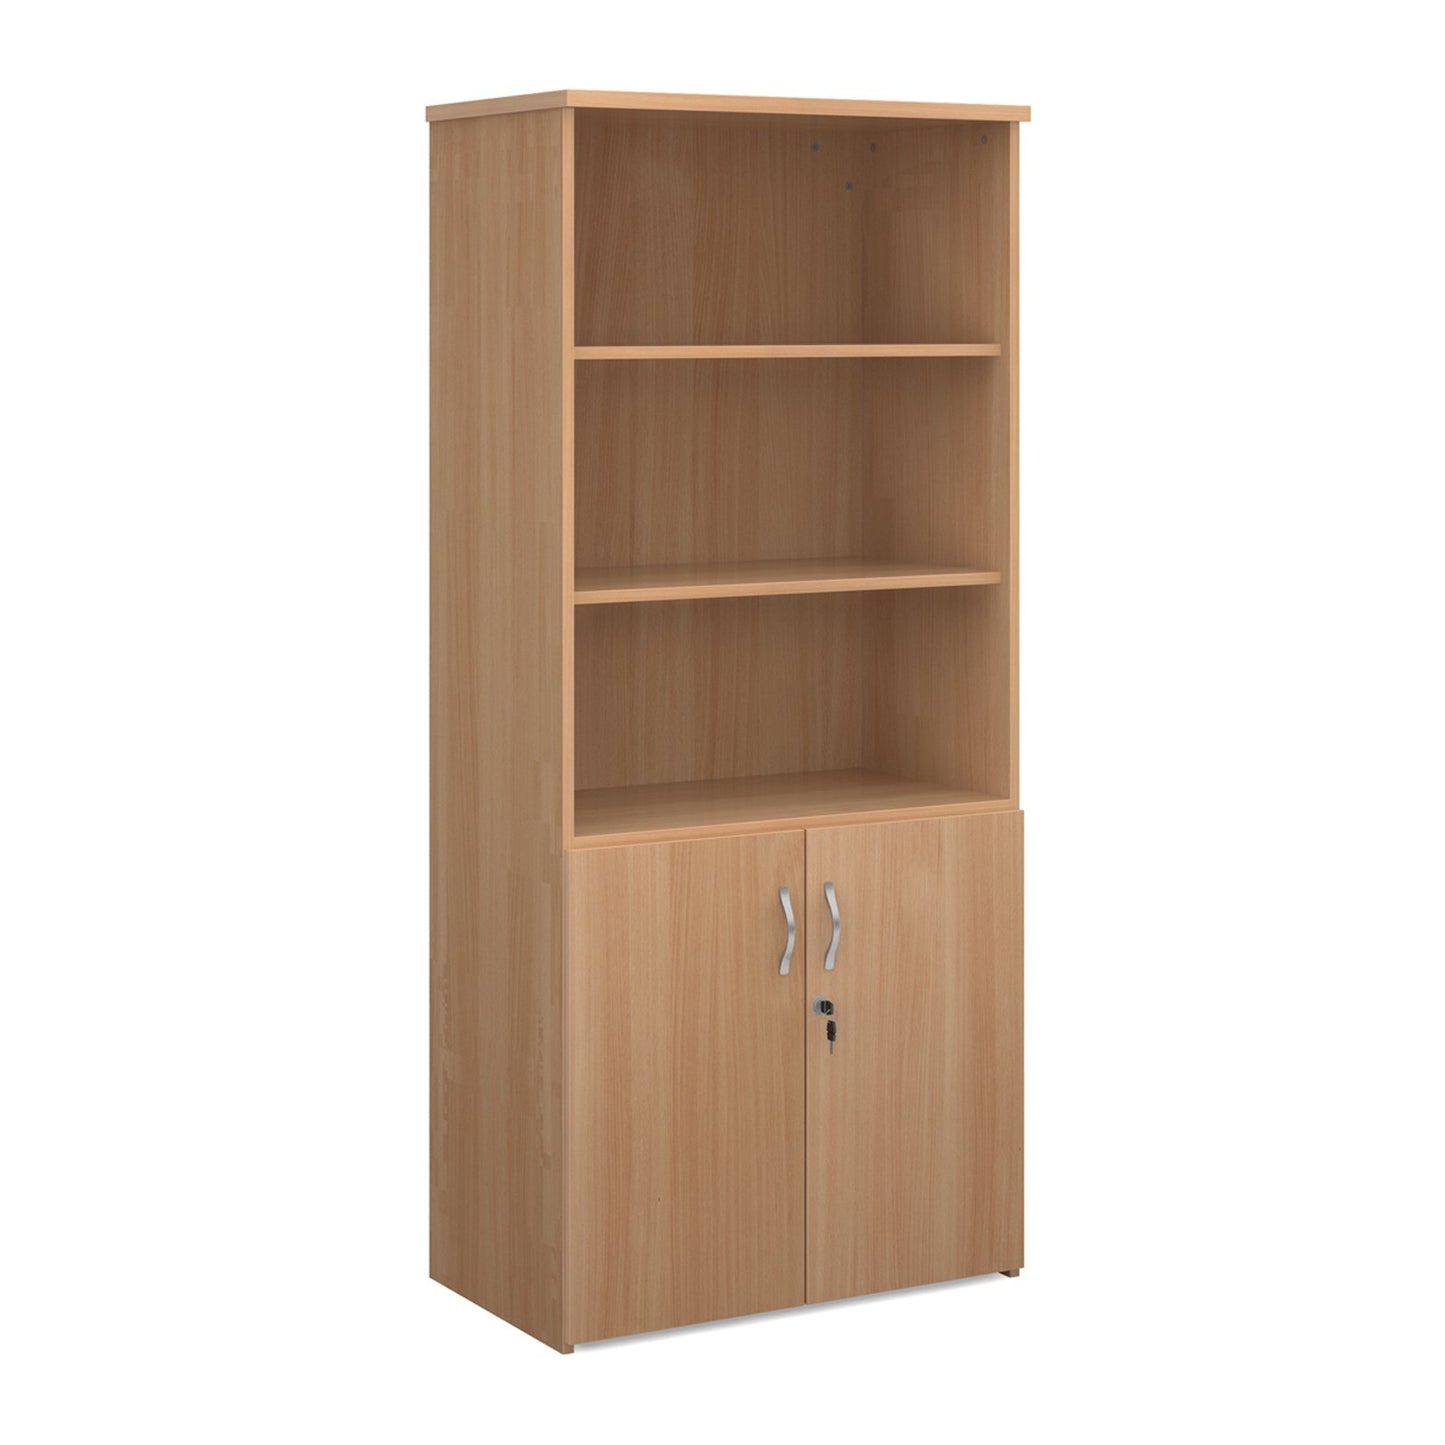 Universal Combination Unit With Open Top 1440mm High - Grey Oak